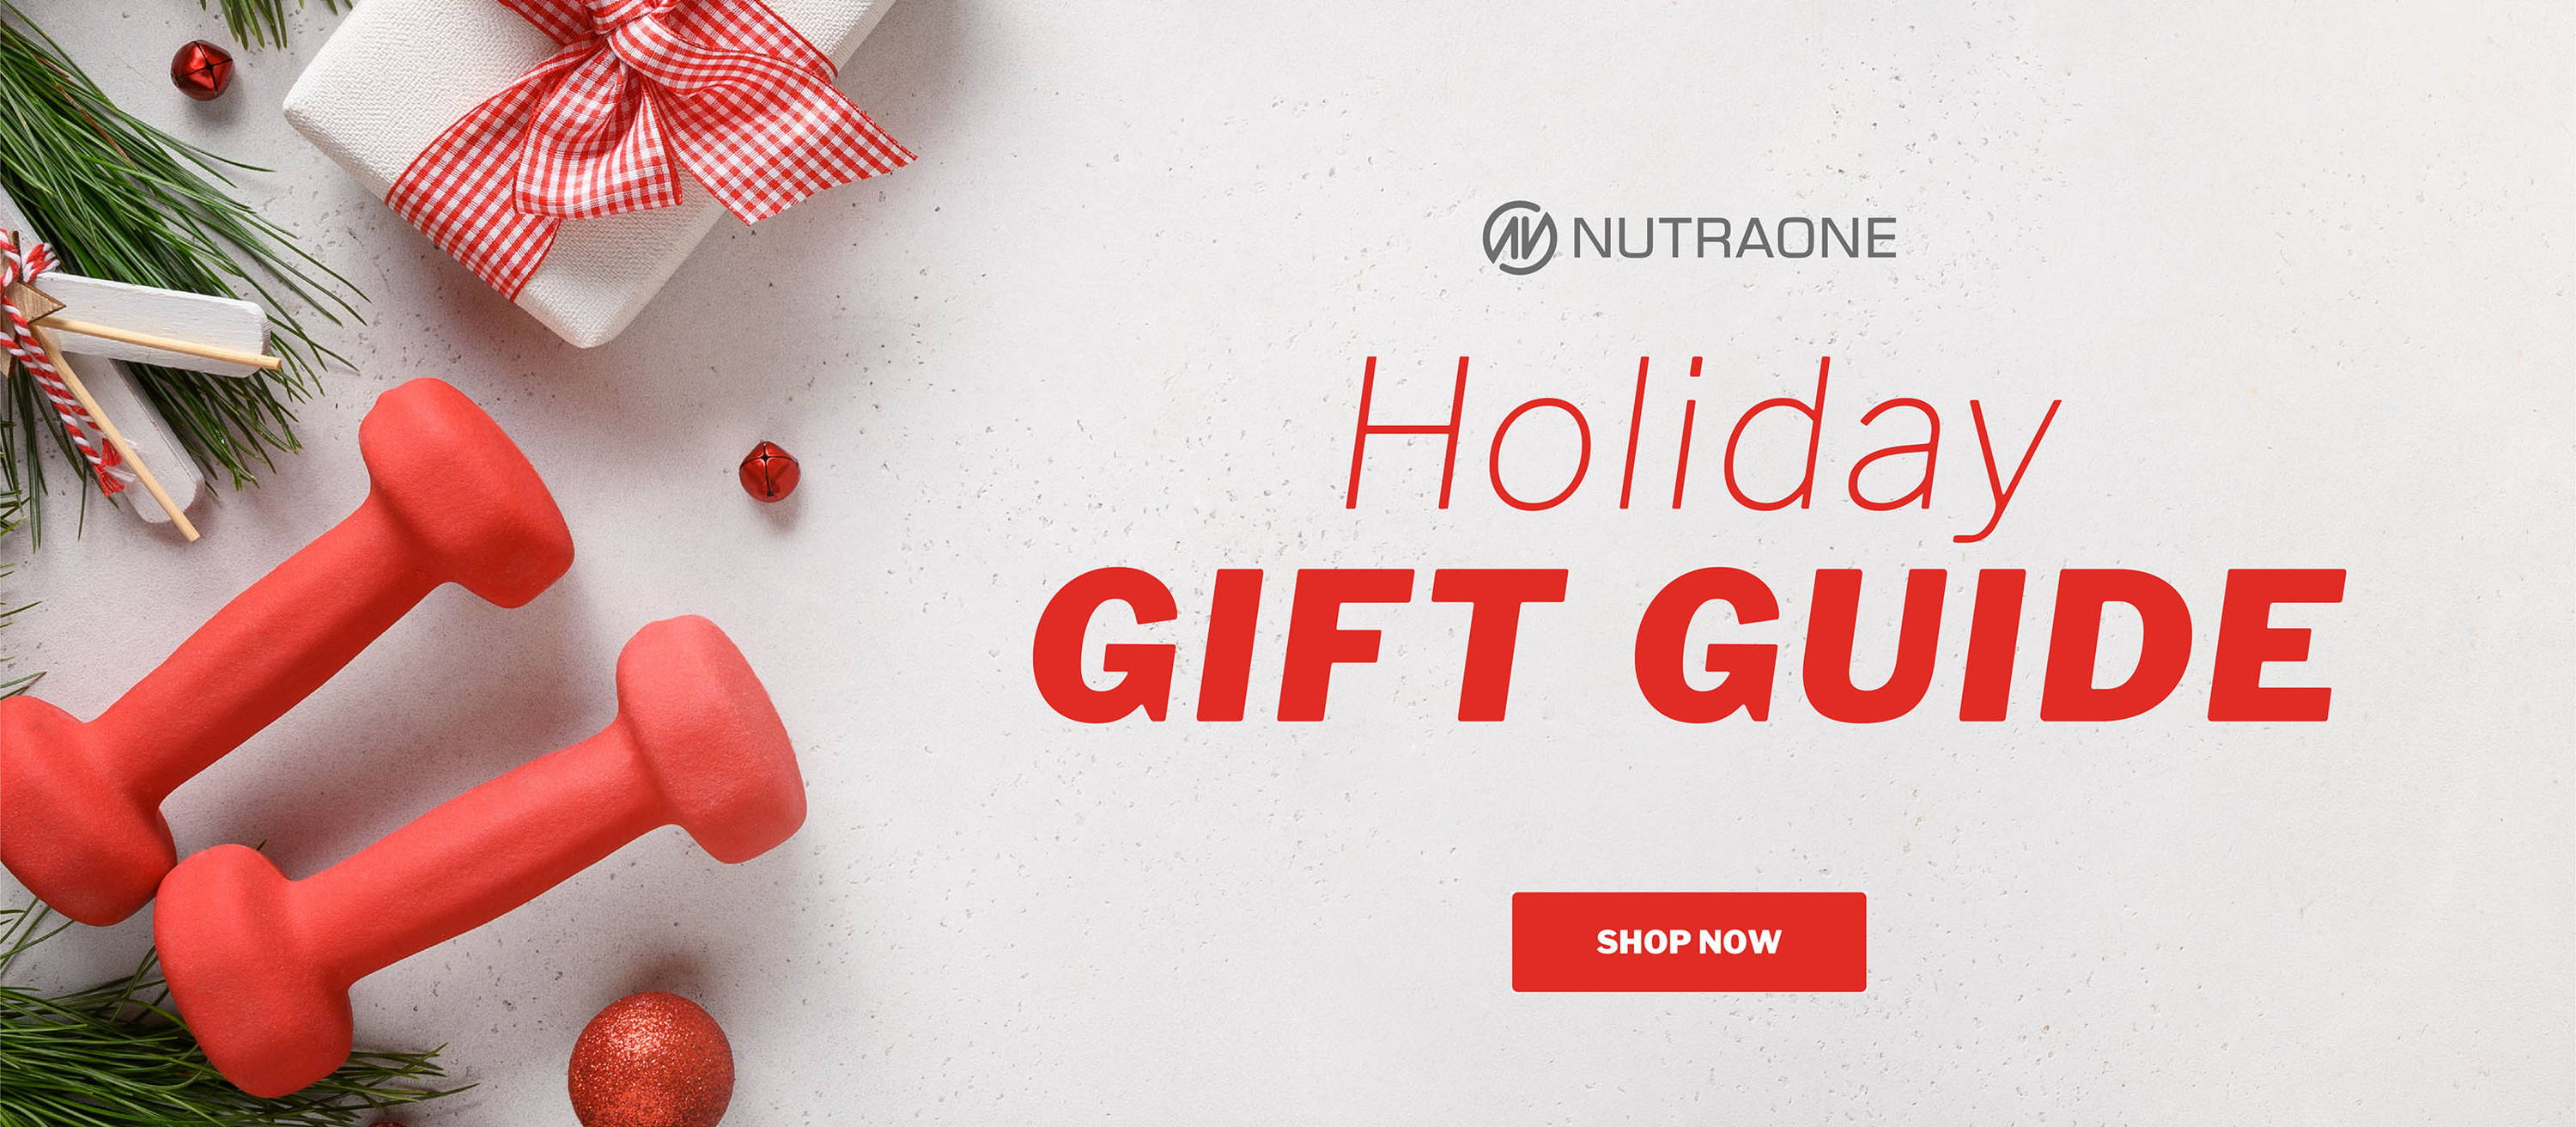 NutraOne Holiday Gift Guide